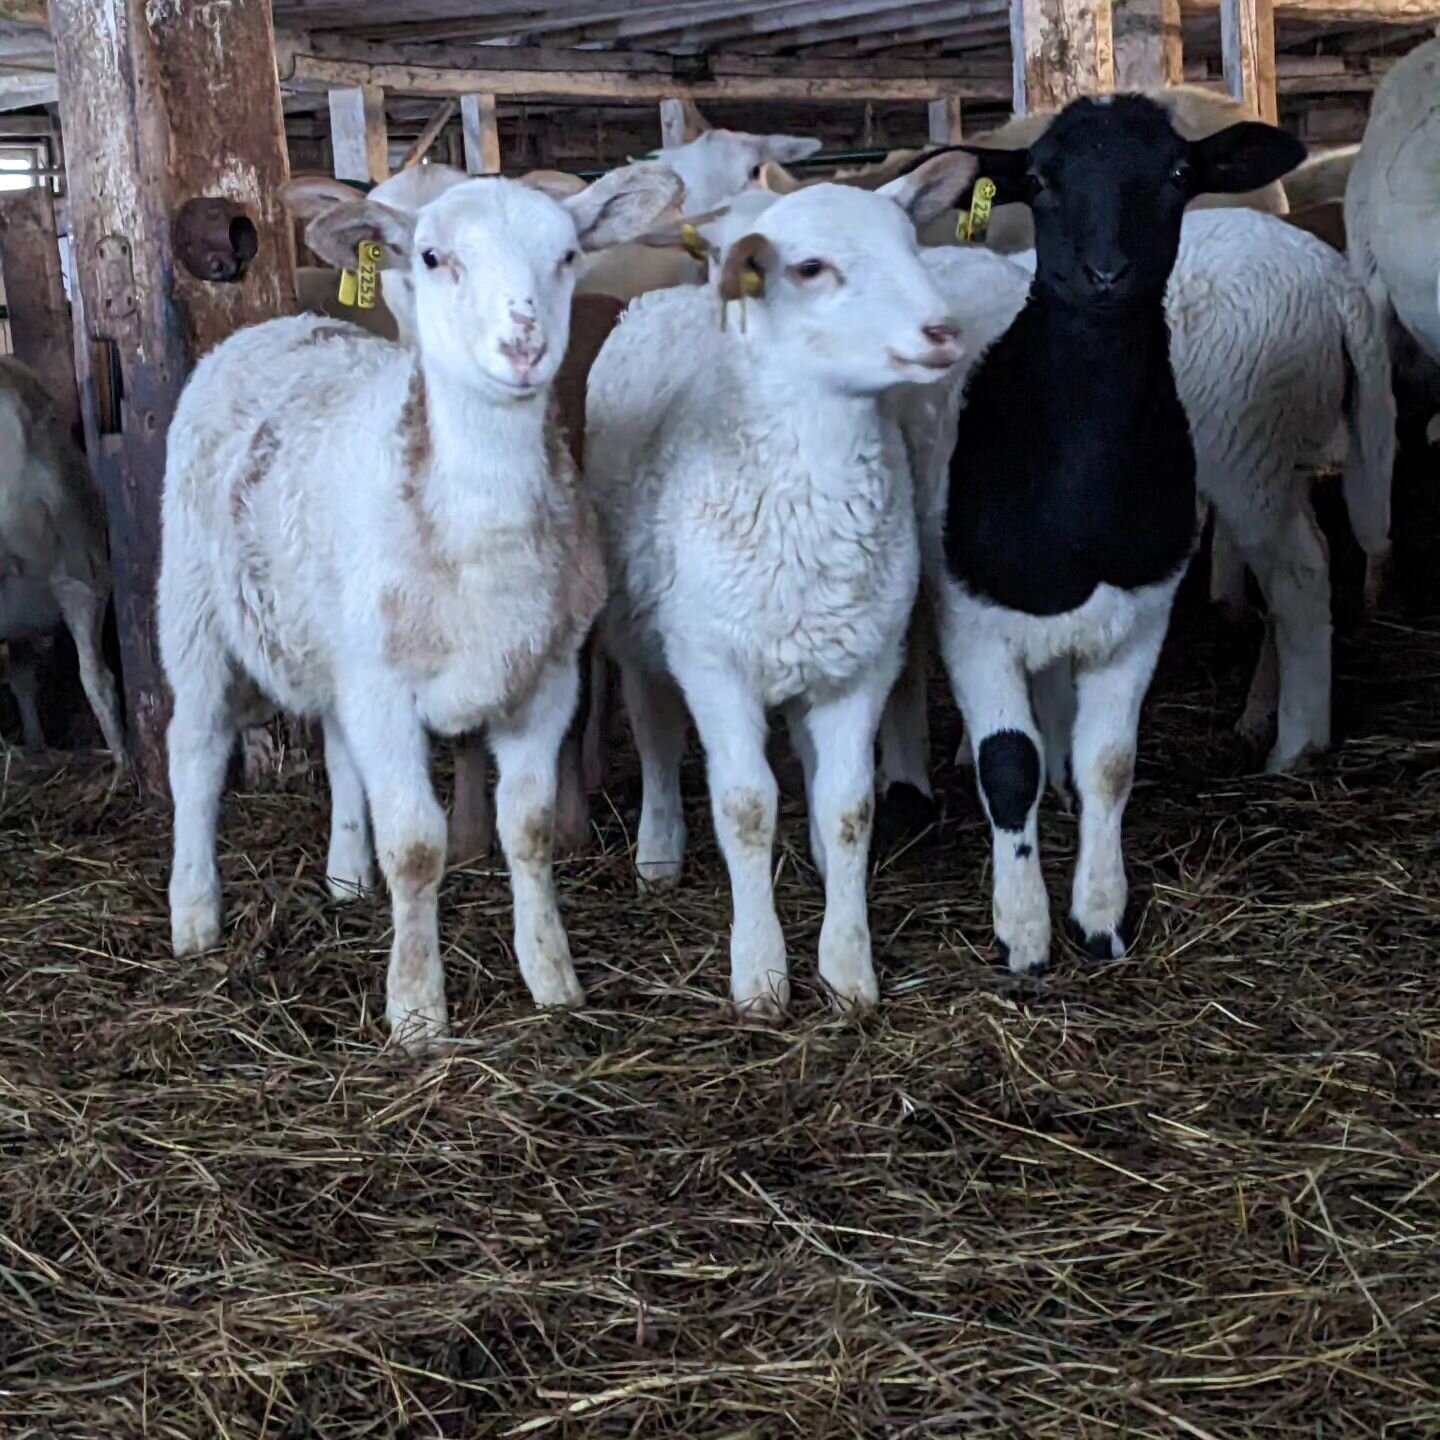 We have a limited number of feeder lambs available!  If you are looking to raise your own lamb this season, we can help.  Happy to answer questions to get you started ❤️

Wish I was posting photos of lambs frolicking on pasture (soon! Look for those 